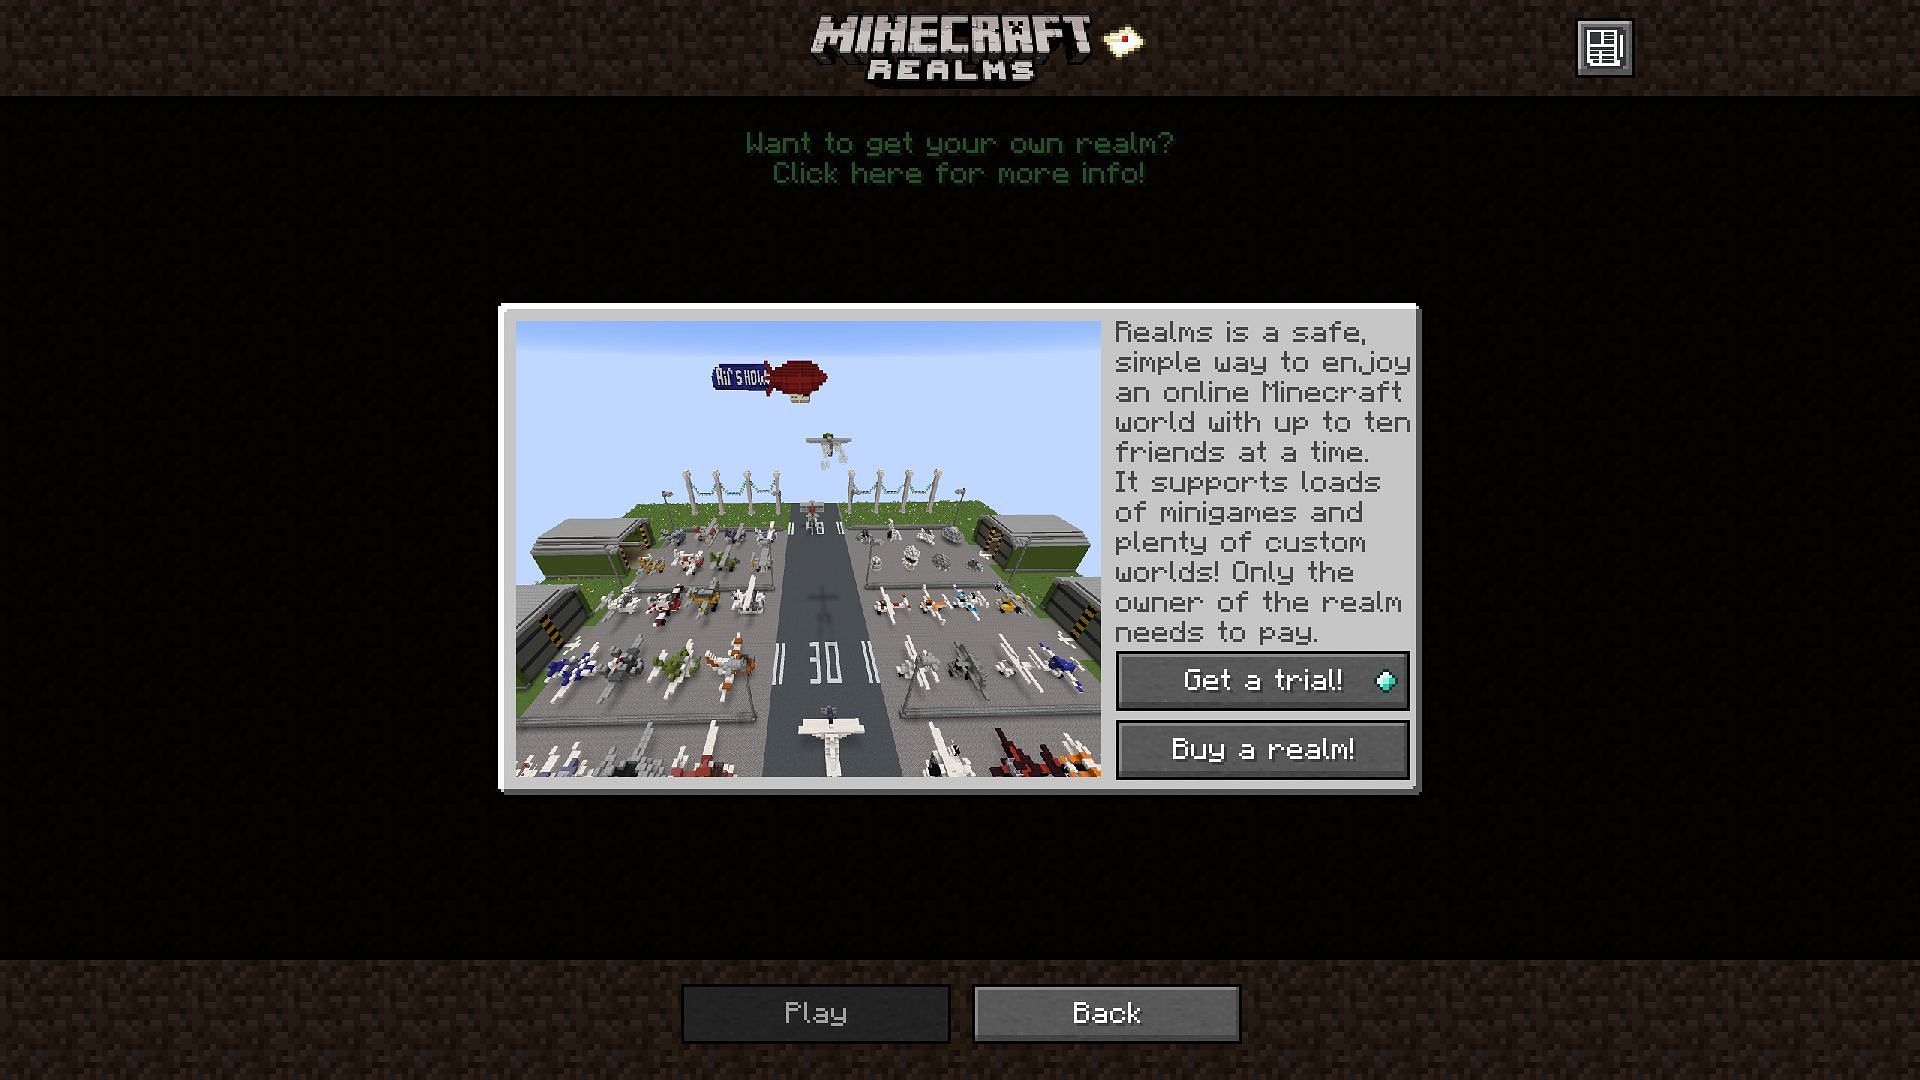 Players can either start a free trial or buy the realms server (Image via Mojang)